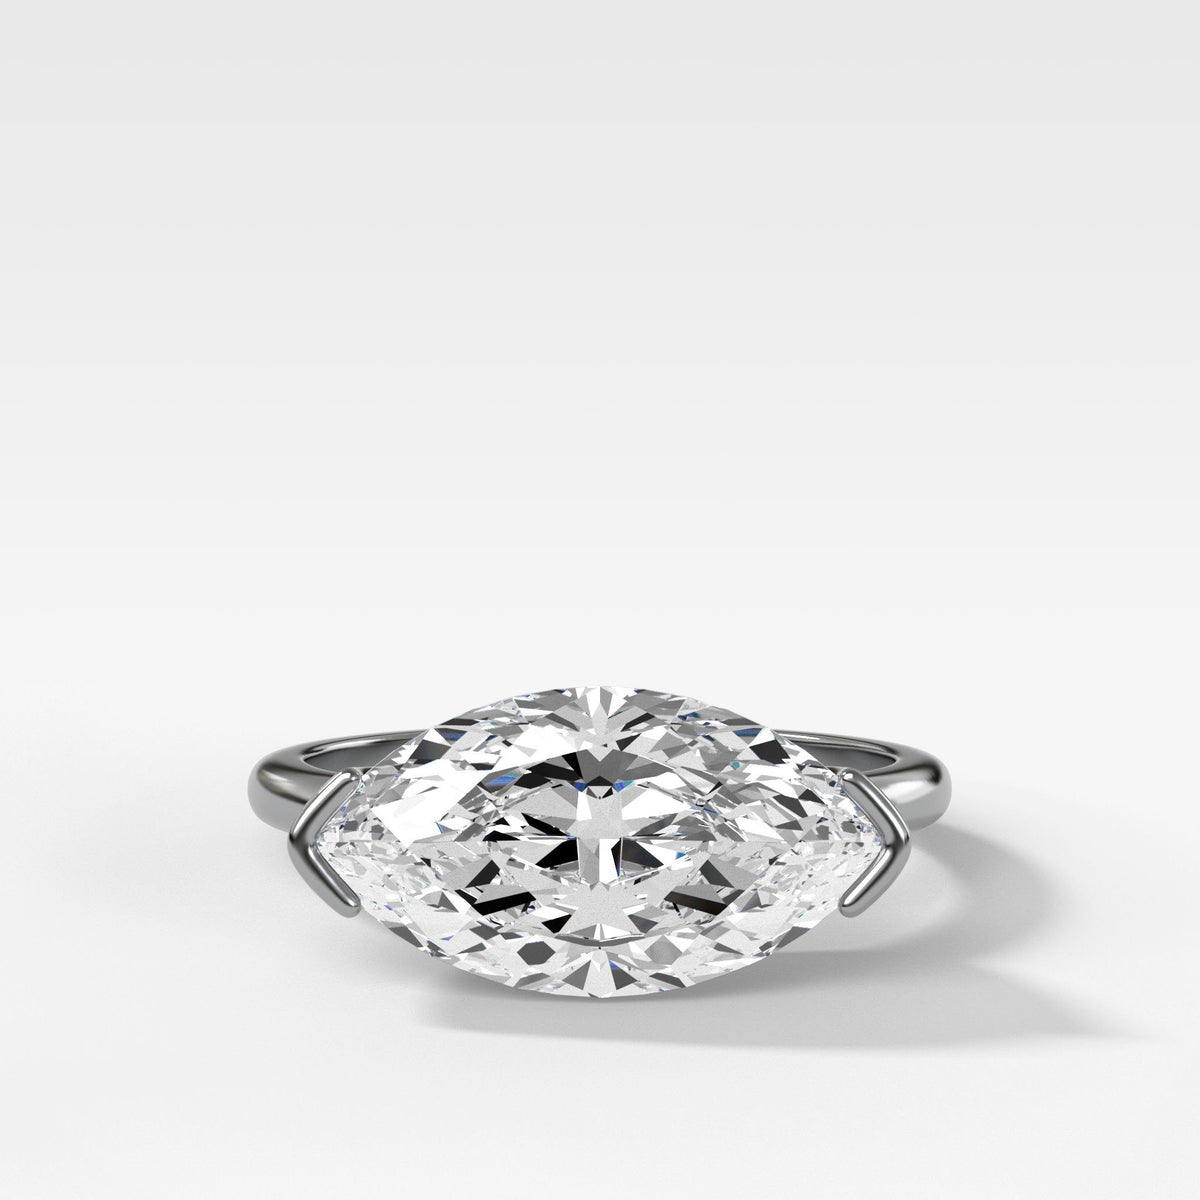 East West Half Bezel Solitaire Engagement Ring With Marquise Cut by Good Stone in White Gold